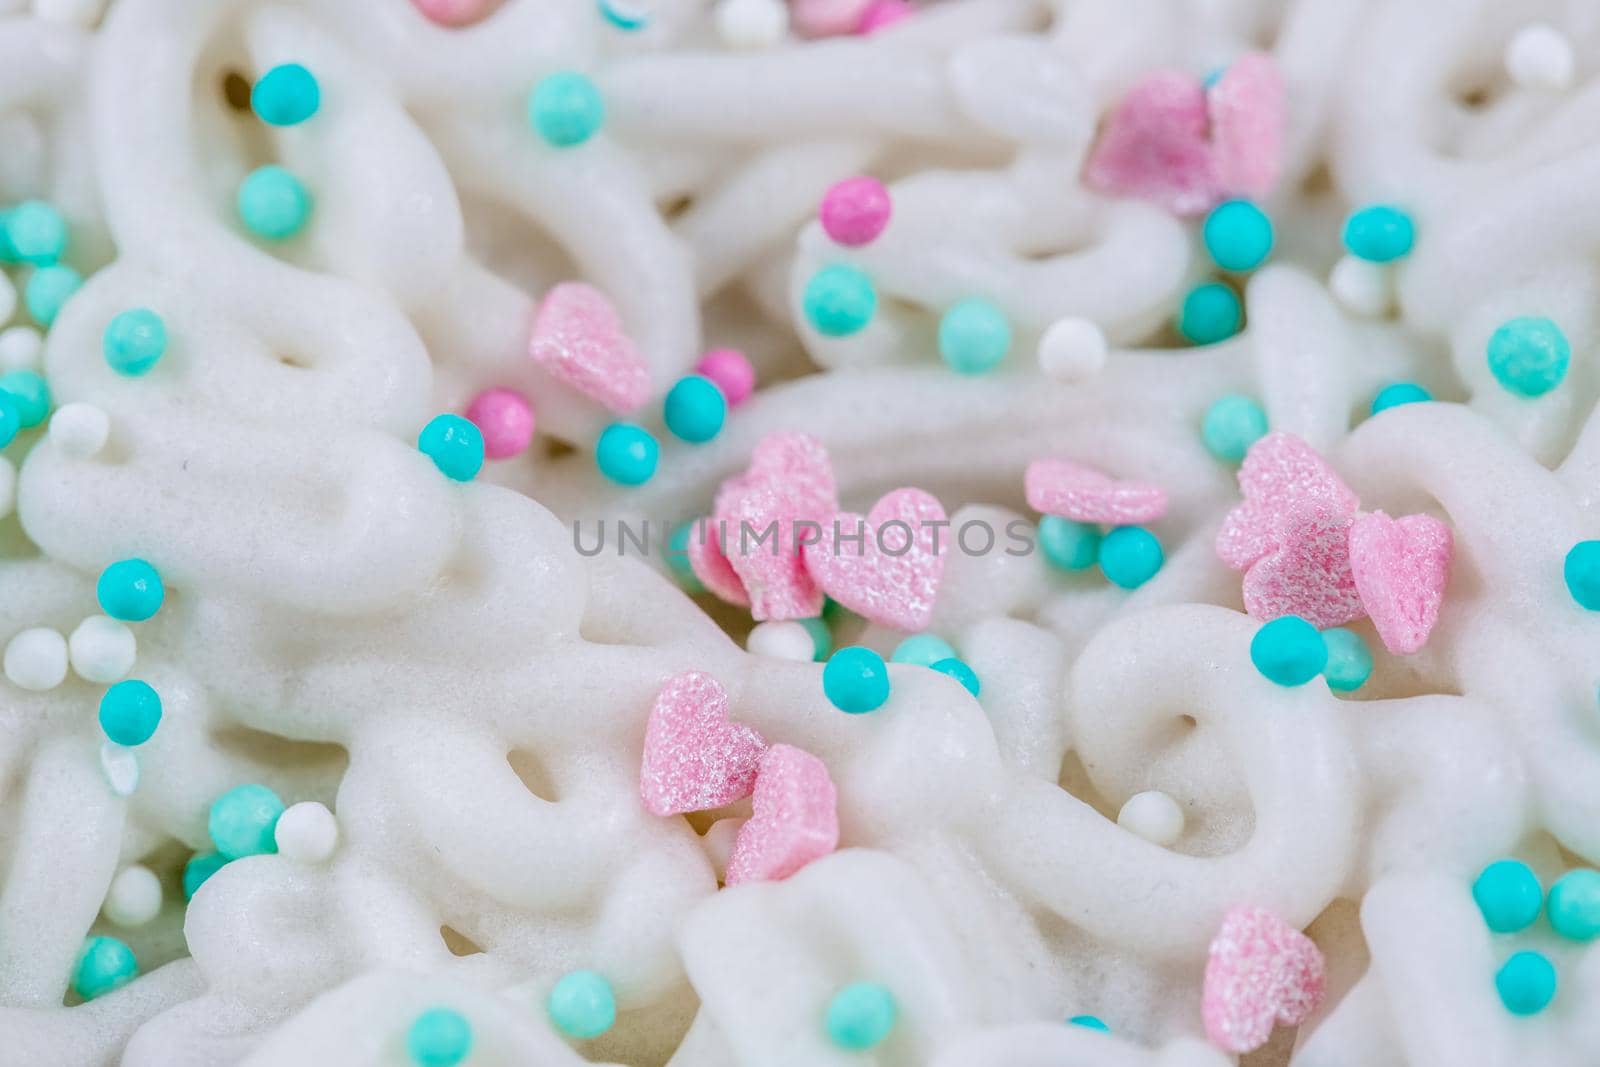 The texture of icing on a cake with pastry sprinkles, macro photography.